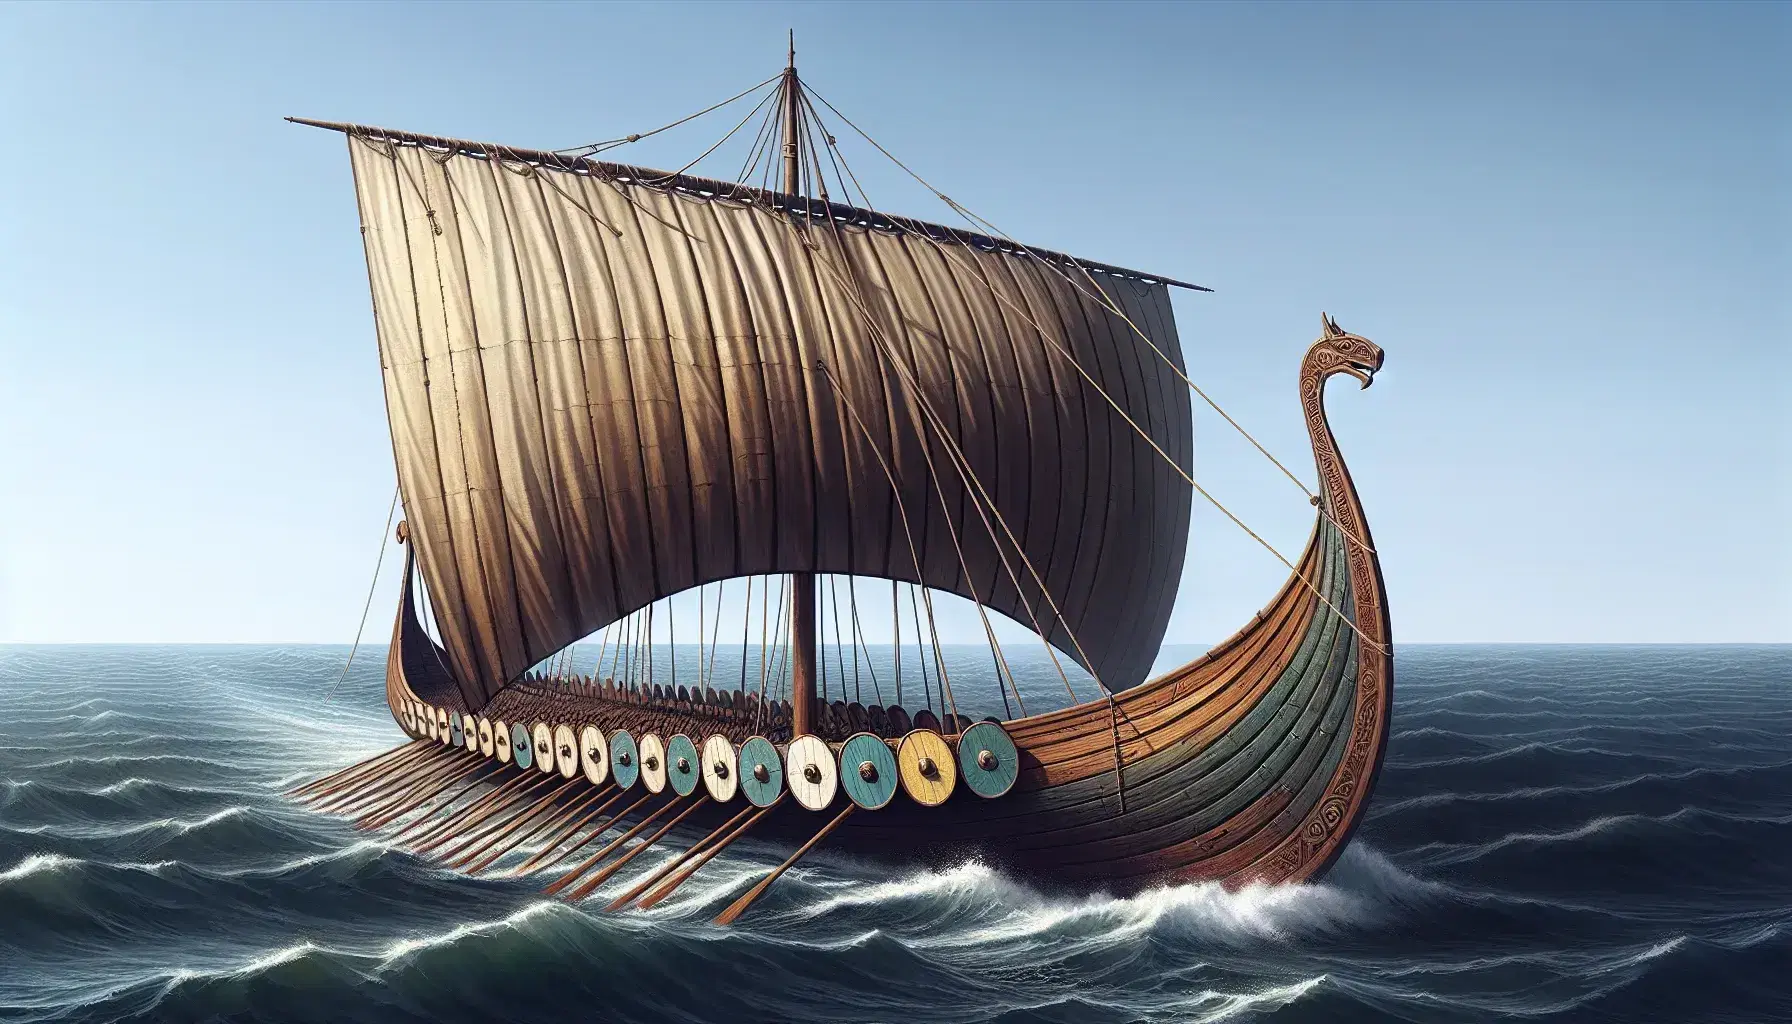 Viking longship at sea with a billowing white sail, dragon head carvings, and shields in blue and yellow, against a backdrop of a rugged coastline.